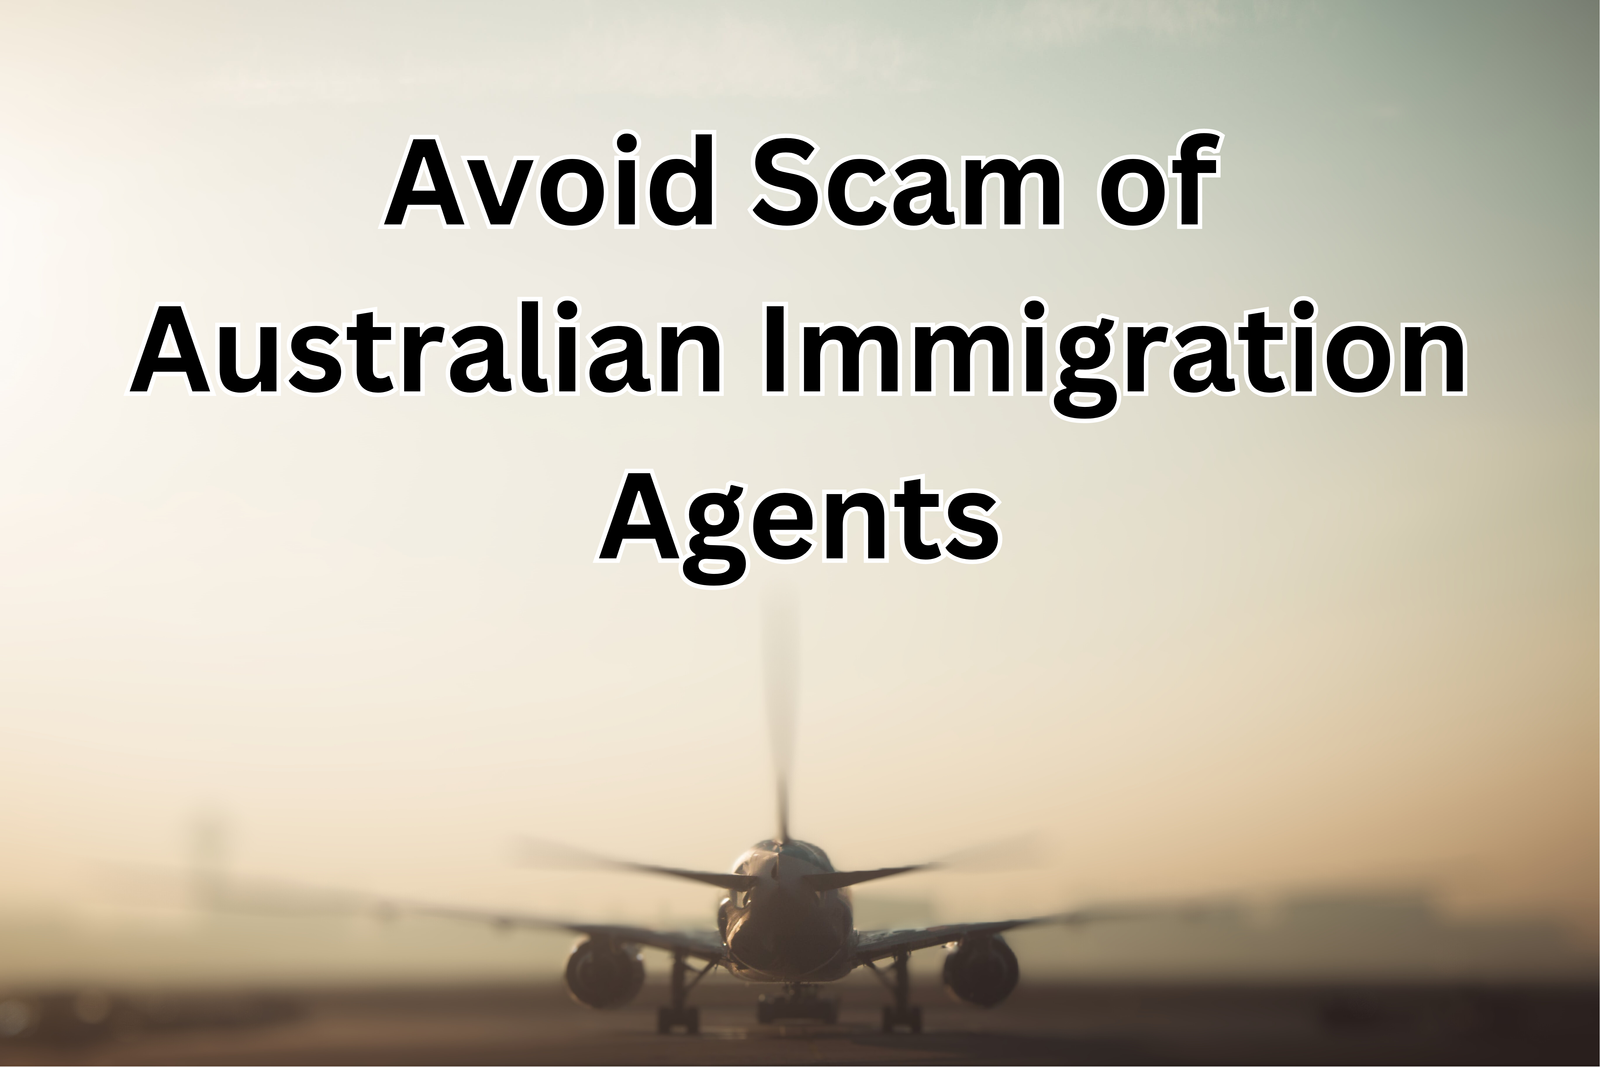 Avoid Scam of Australian Immigration Agents